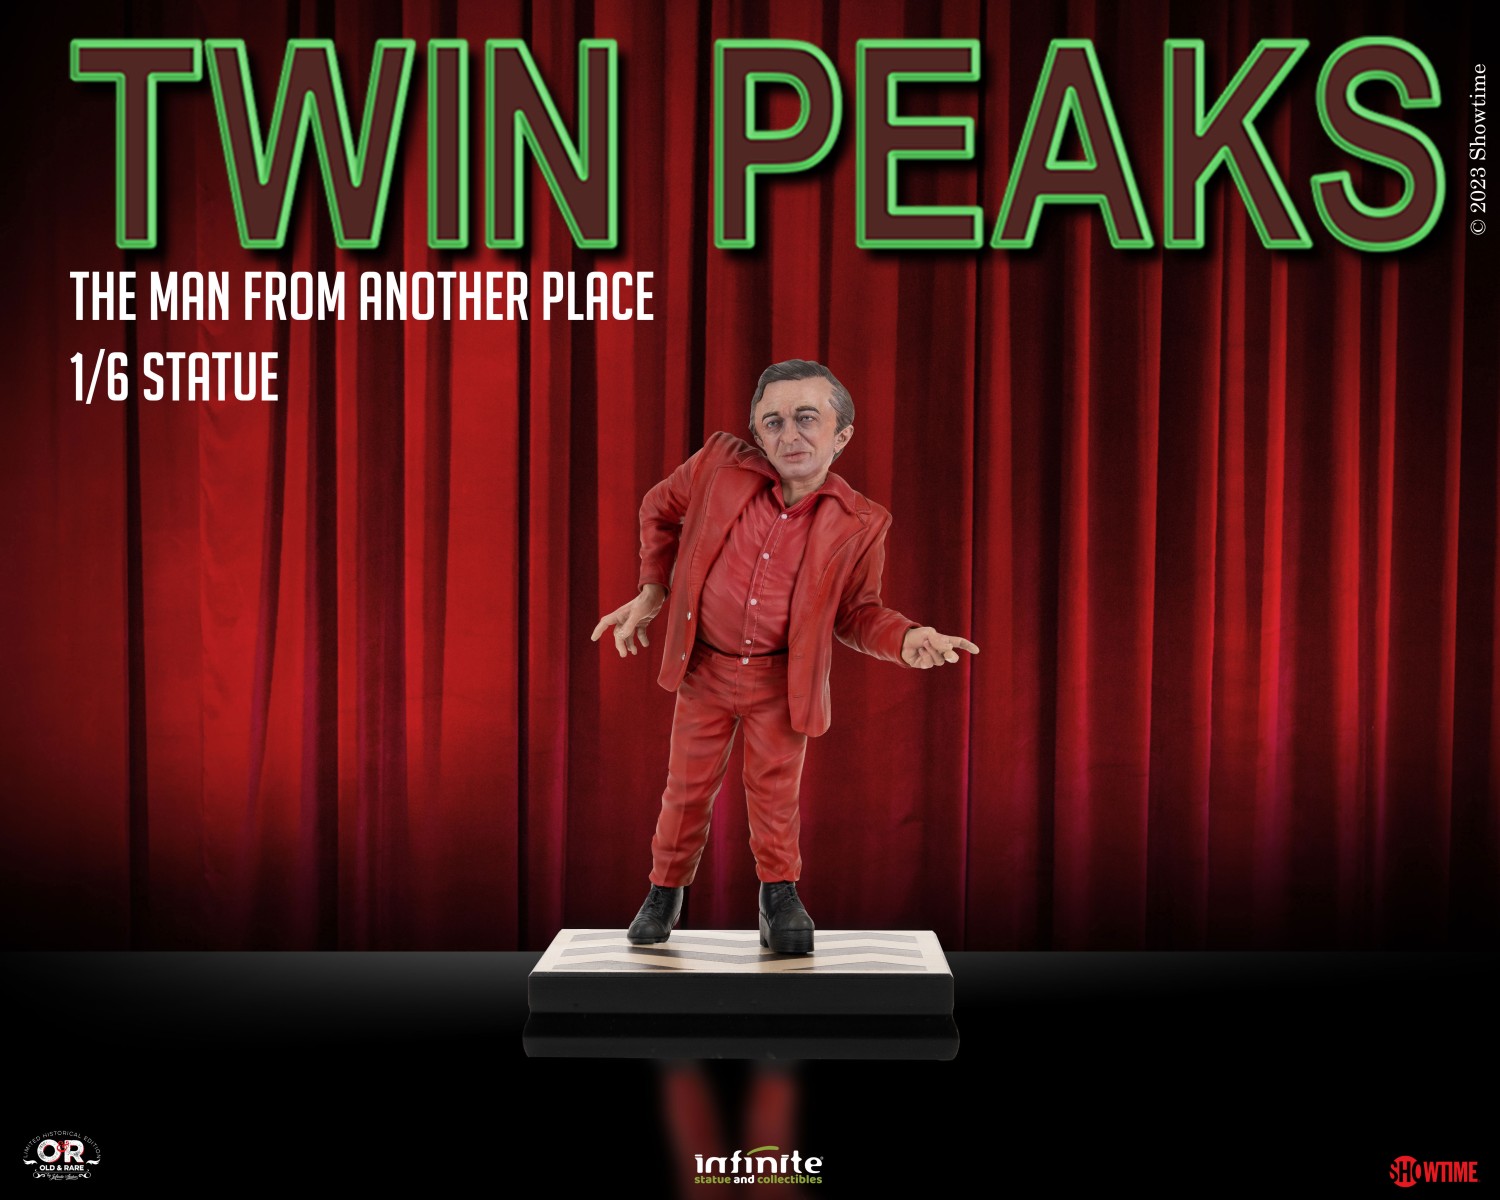 https://www.infinitestatue.com/2393-large_default/twin-peaks-the-man-from-another-place-16-statue.jpg